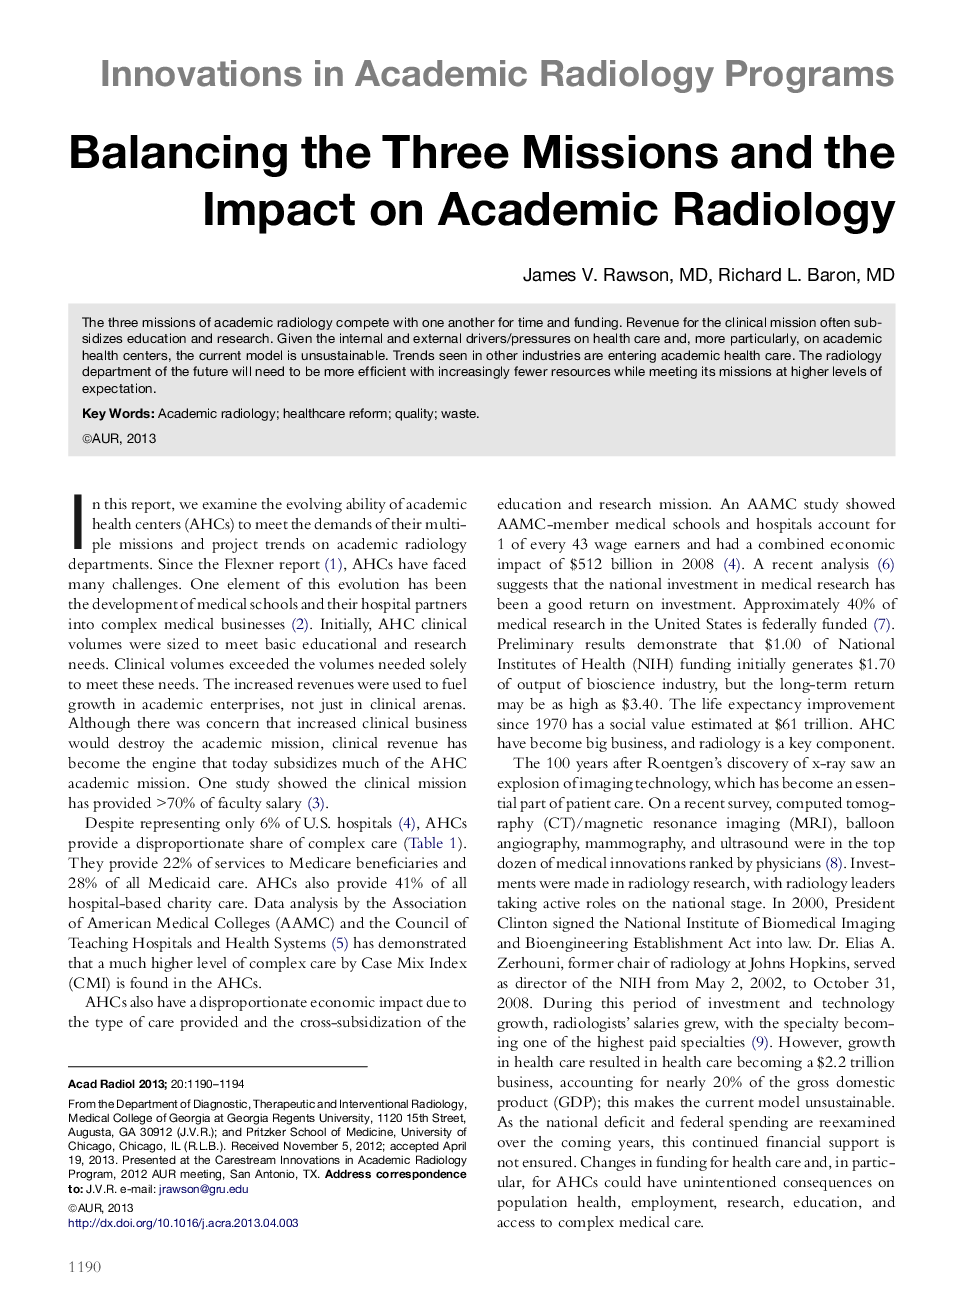 Balancing the Three Missions and the Impact on Academic Radiology